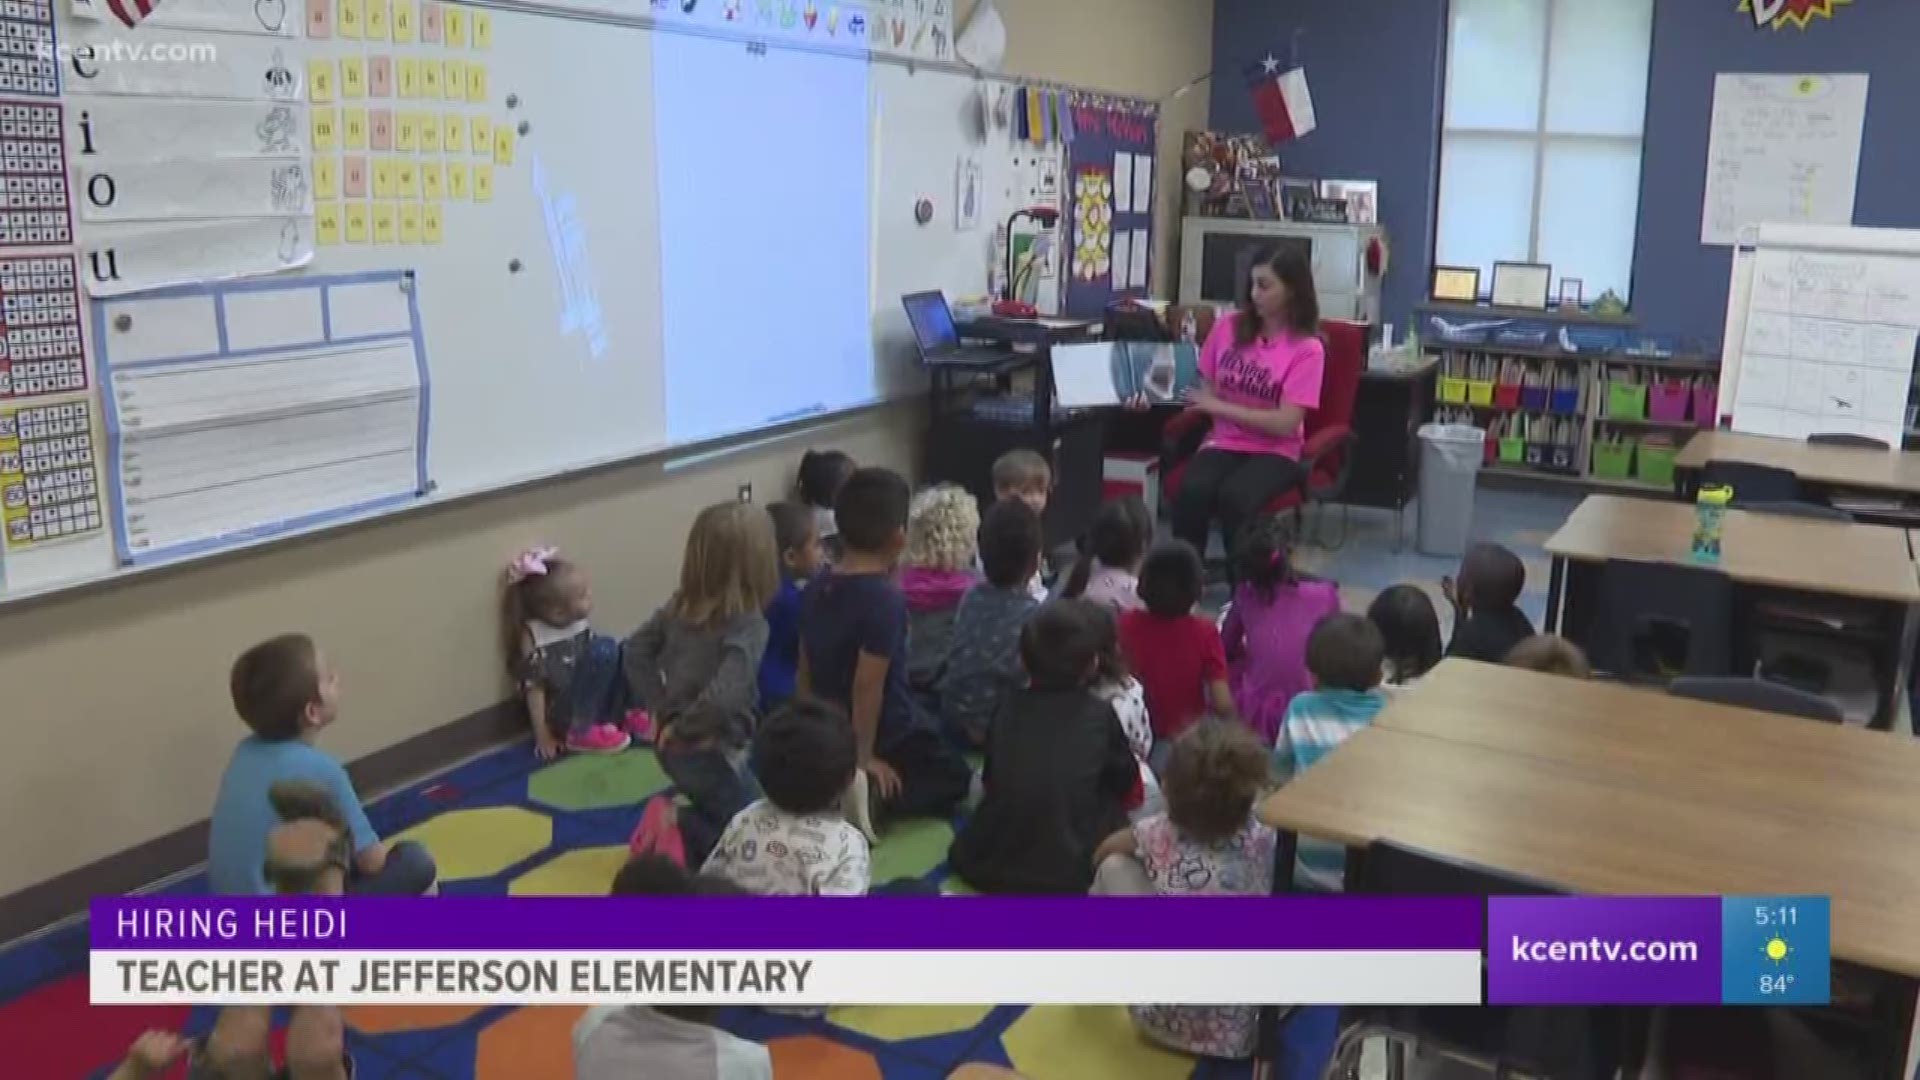 Heidi went back to the classroom and spent the day as a teacher at Jefferson Elementary School.